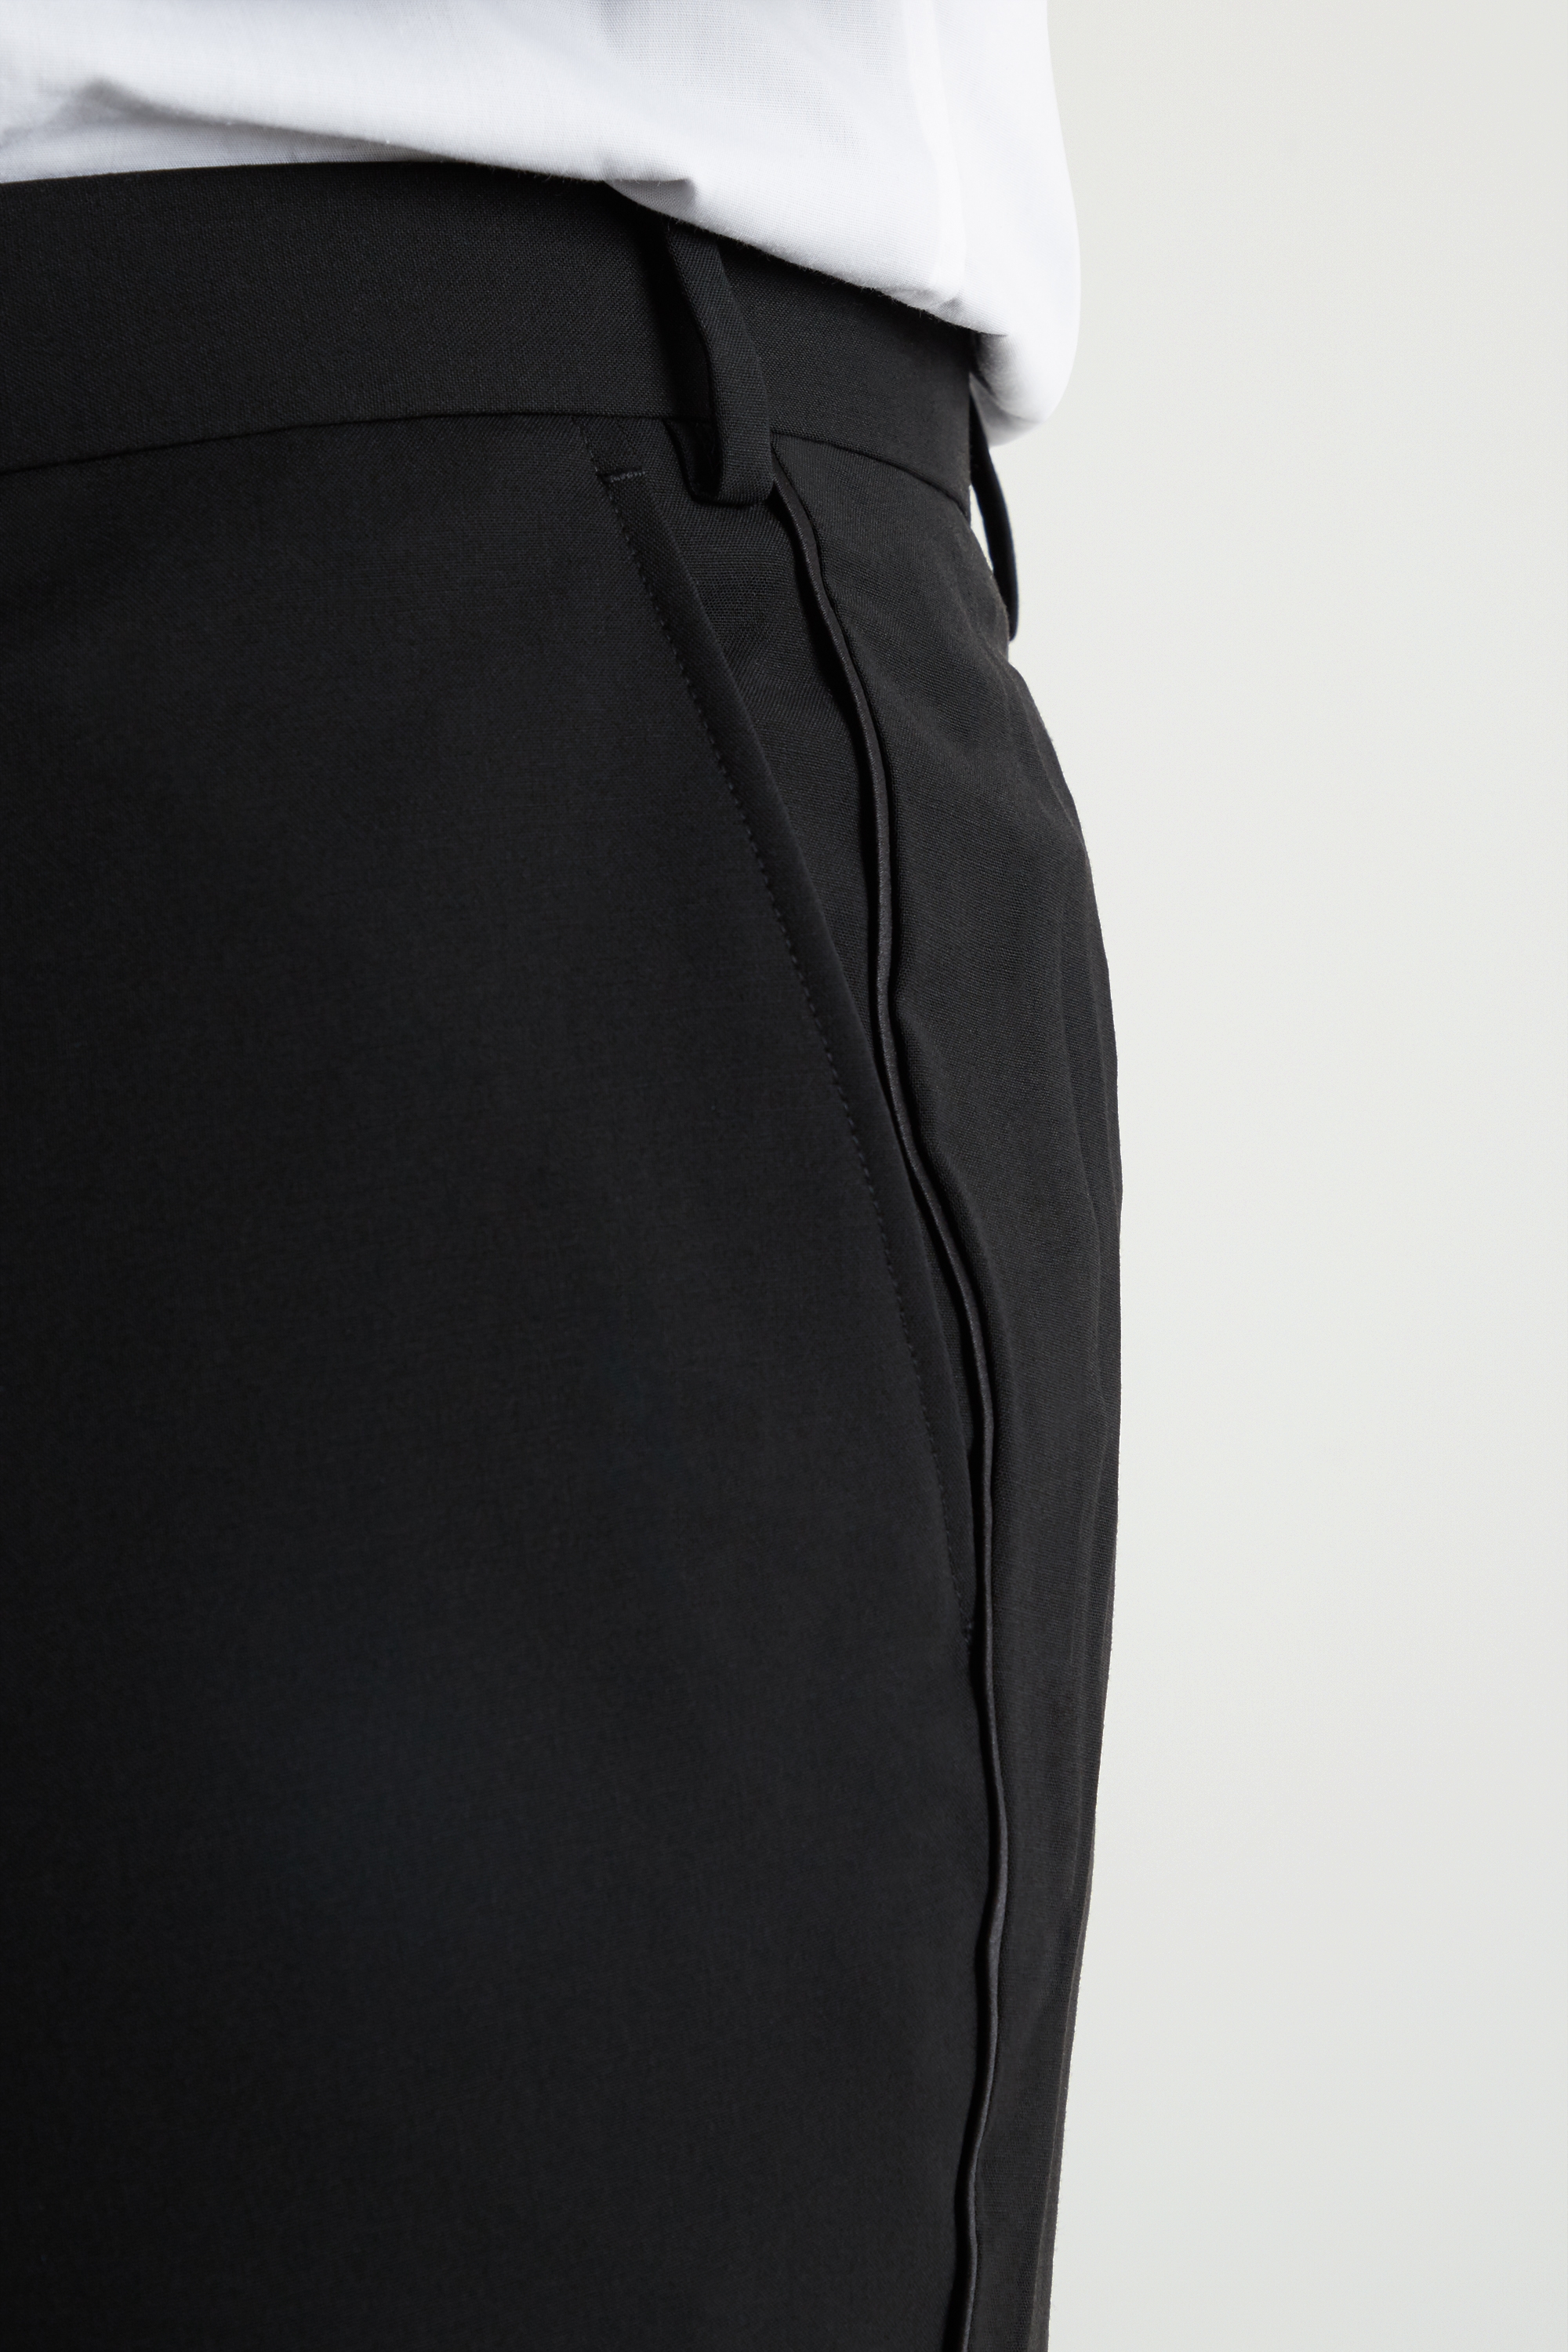 Tailored Fit Black Dress Trousers | Buy Online at Moss